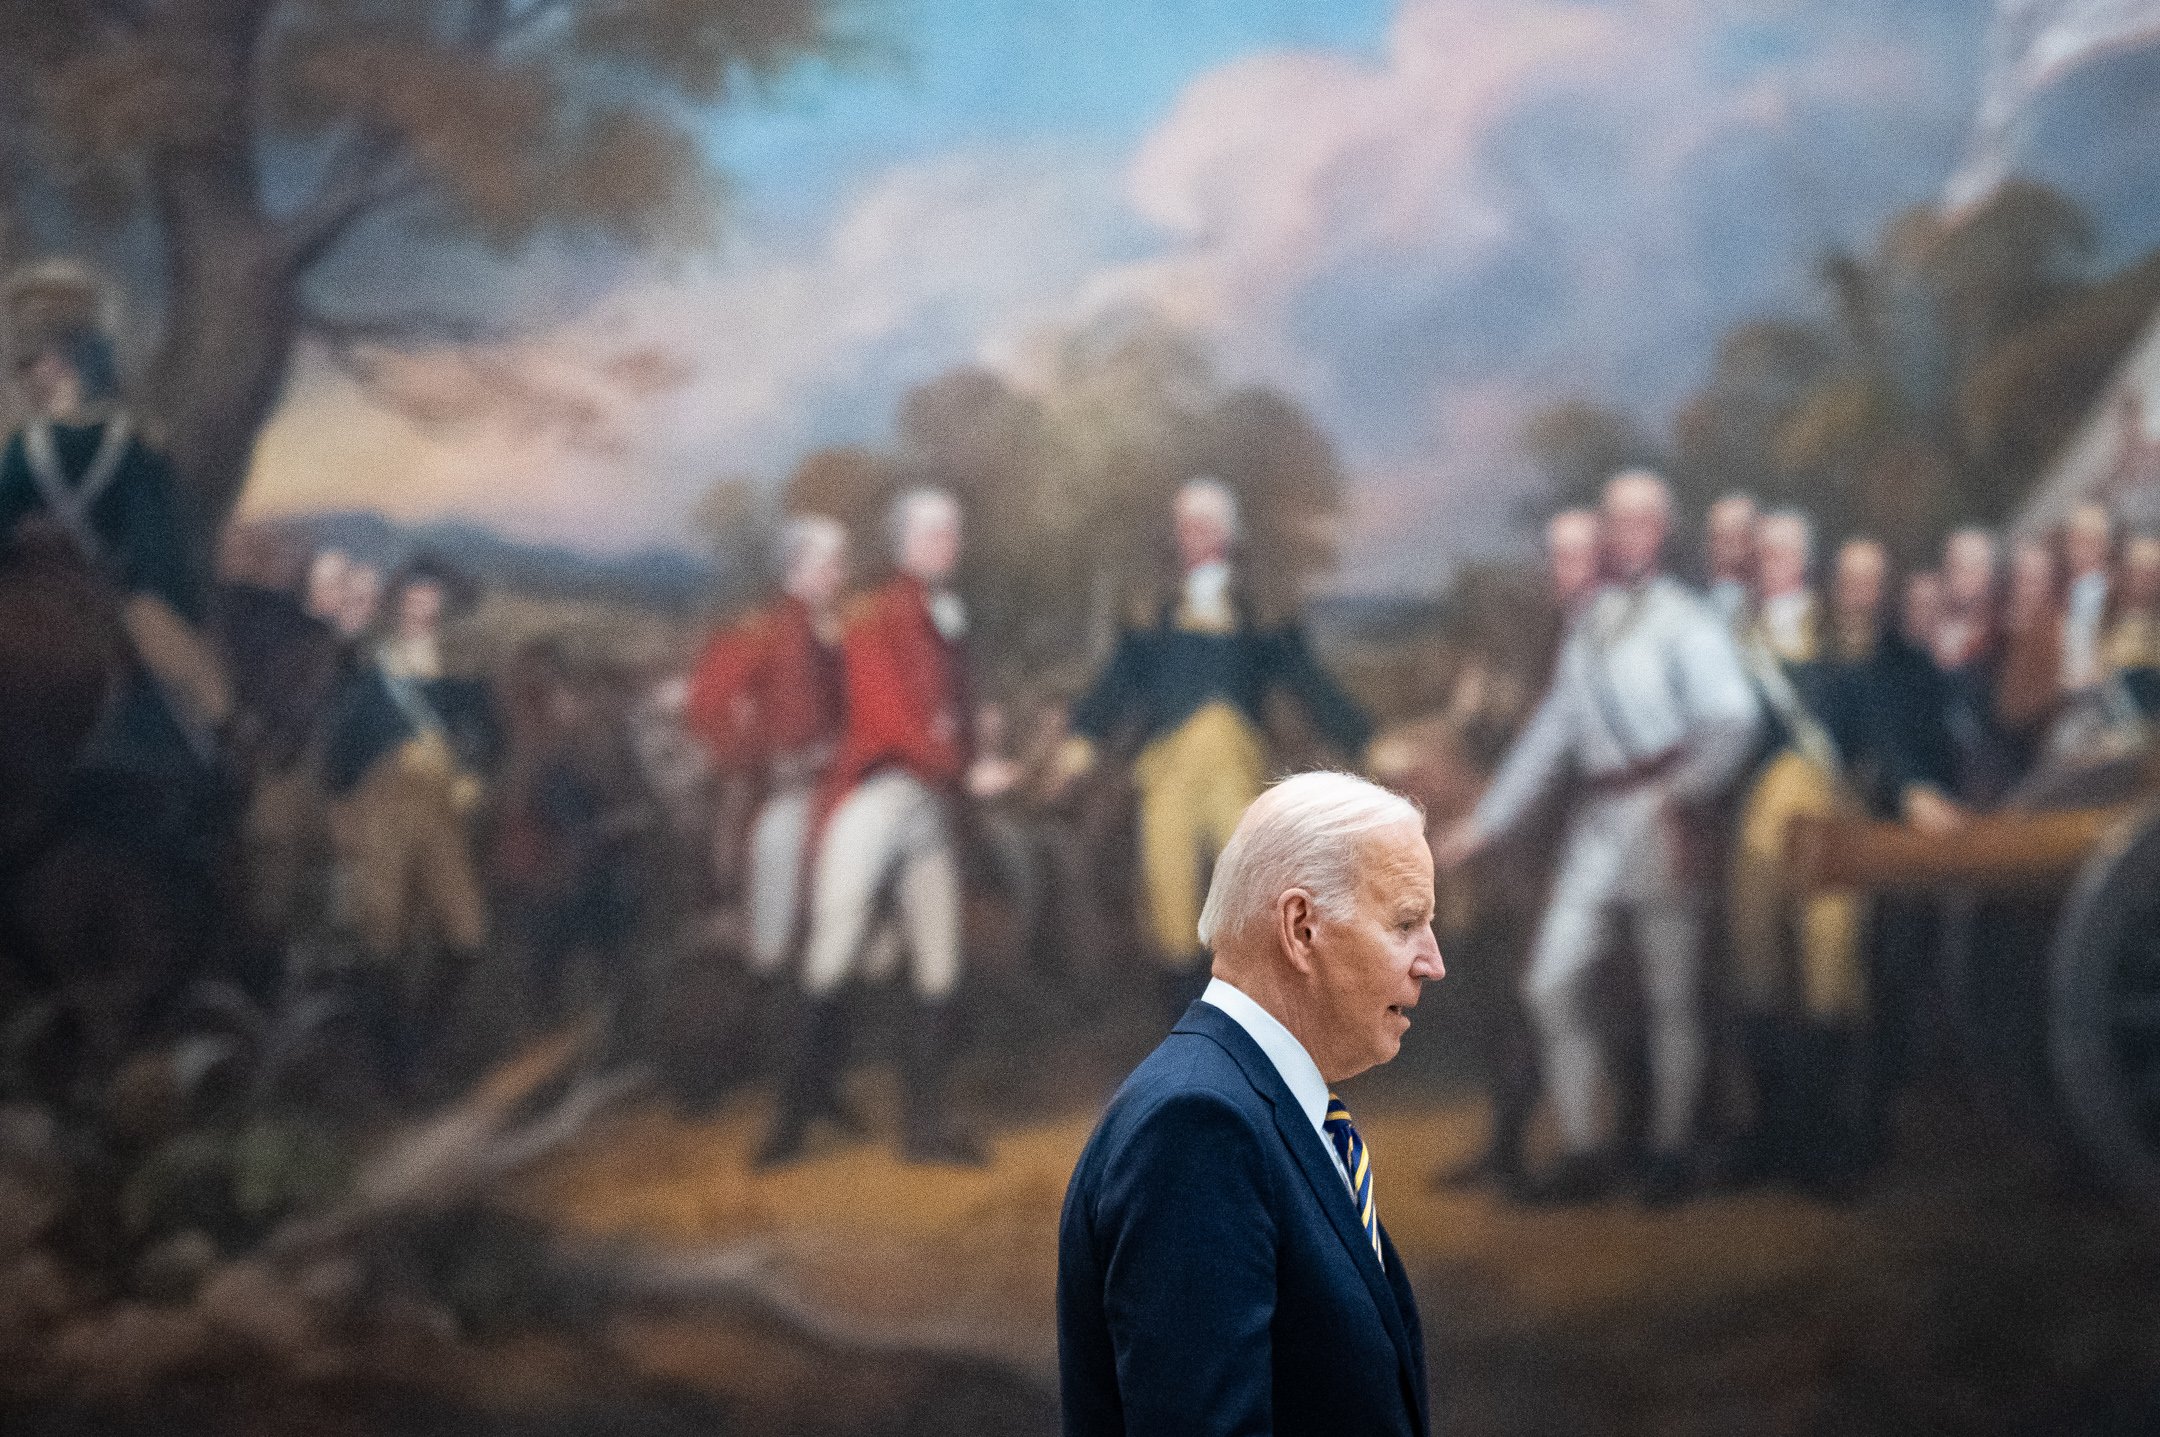  President Joe Biden walks through the U.S. Capitol Rotunda after paying respects to the late Representative Don Young (R-AK), whose remains were lying in state in Statuary Hall, in Washington, D.C., on March 29, 2022. (Graeme Sloan for Sipa USA) 